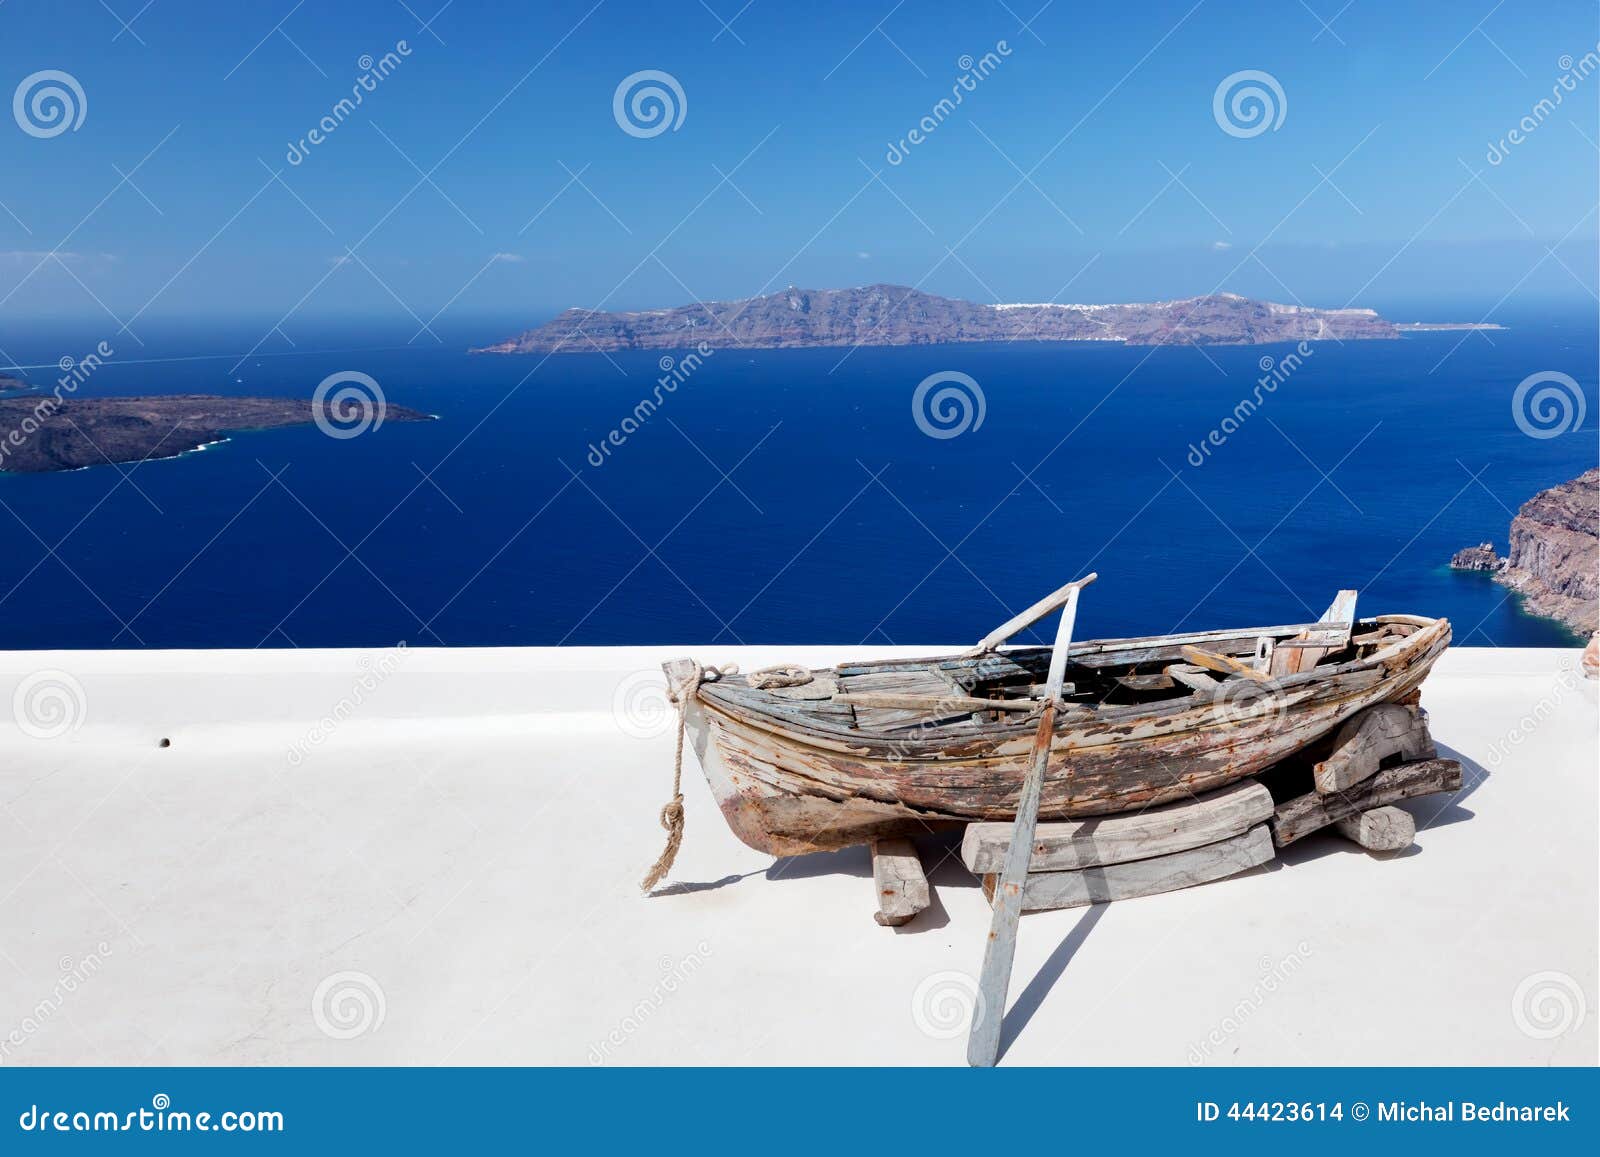 Old Boat On The Roof Of The Building On Santorini Island ...